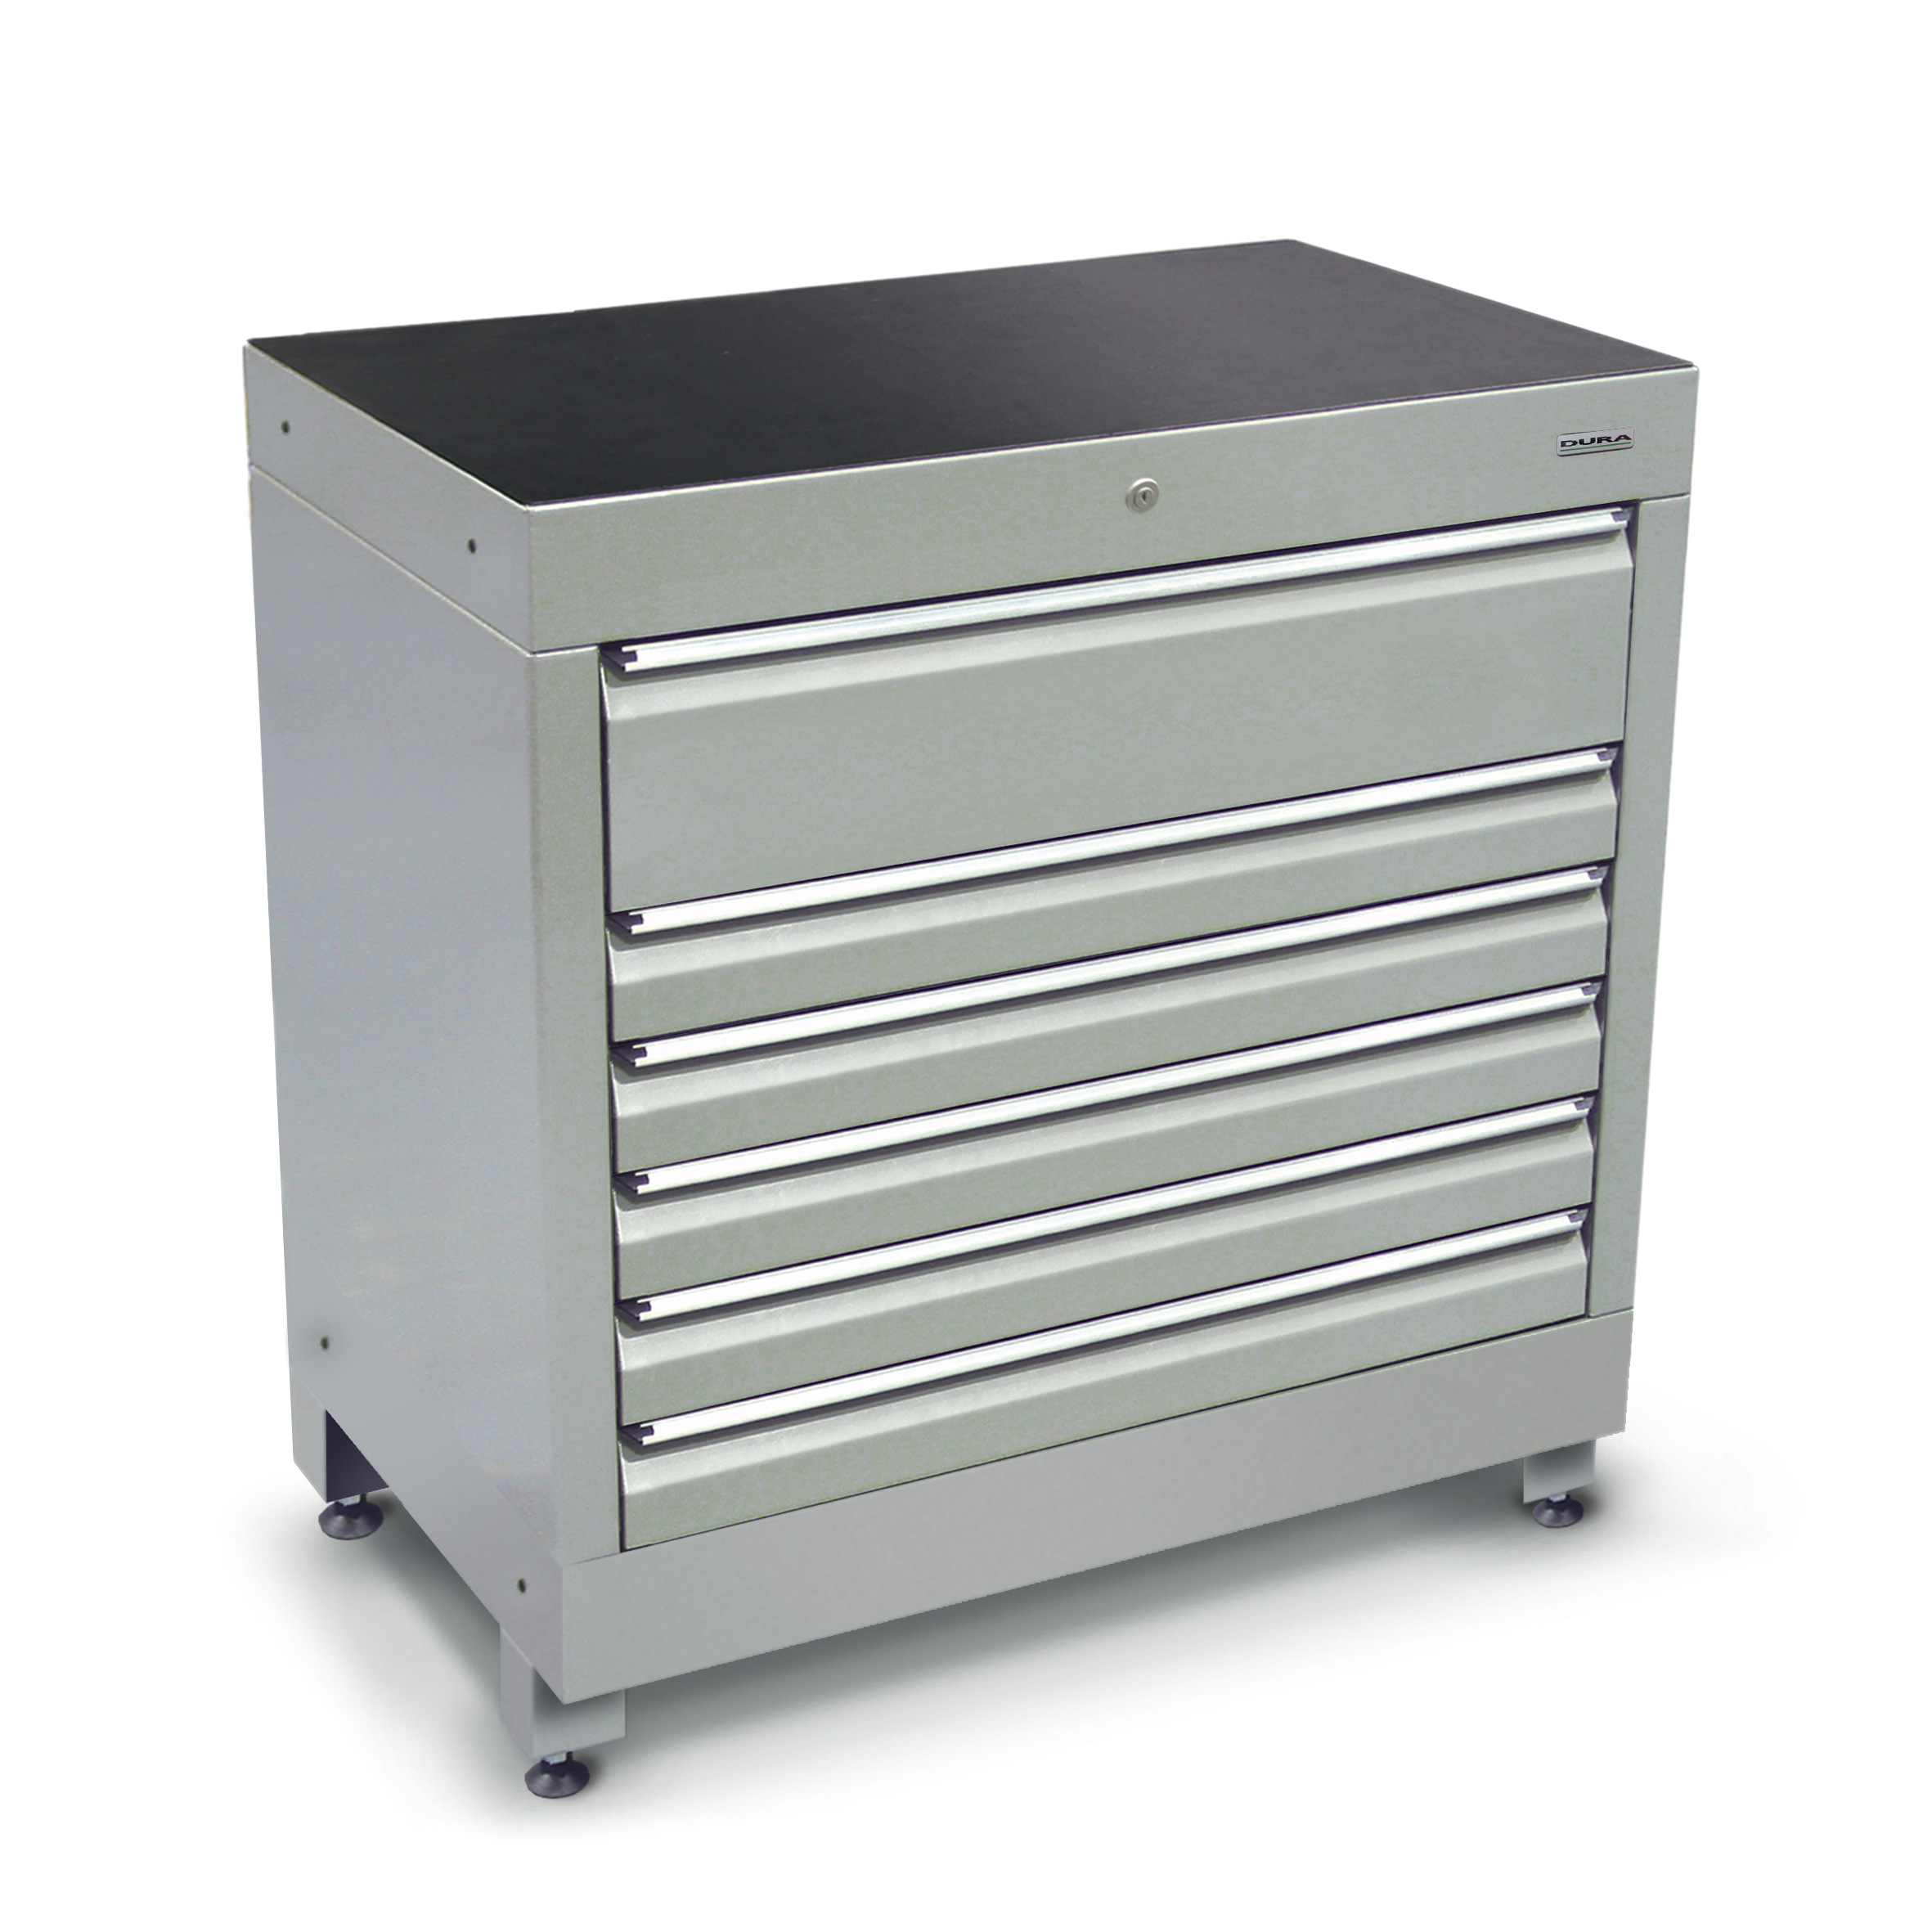 900 series cabinet with 6 drawers (5 medium, 1 large) and feet